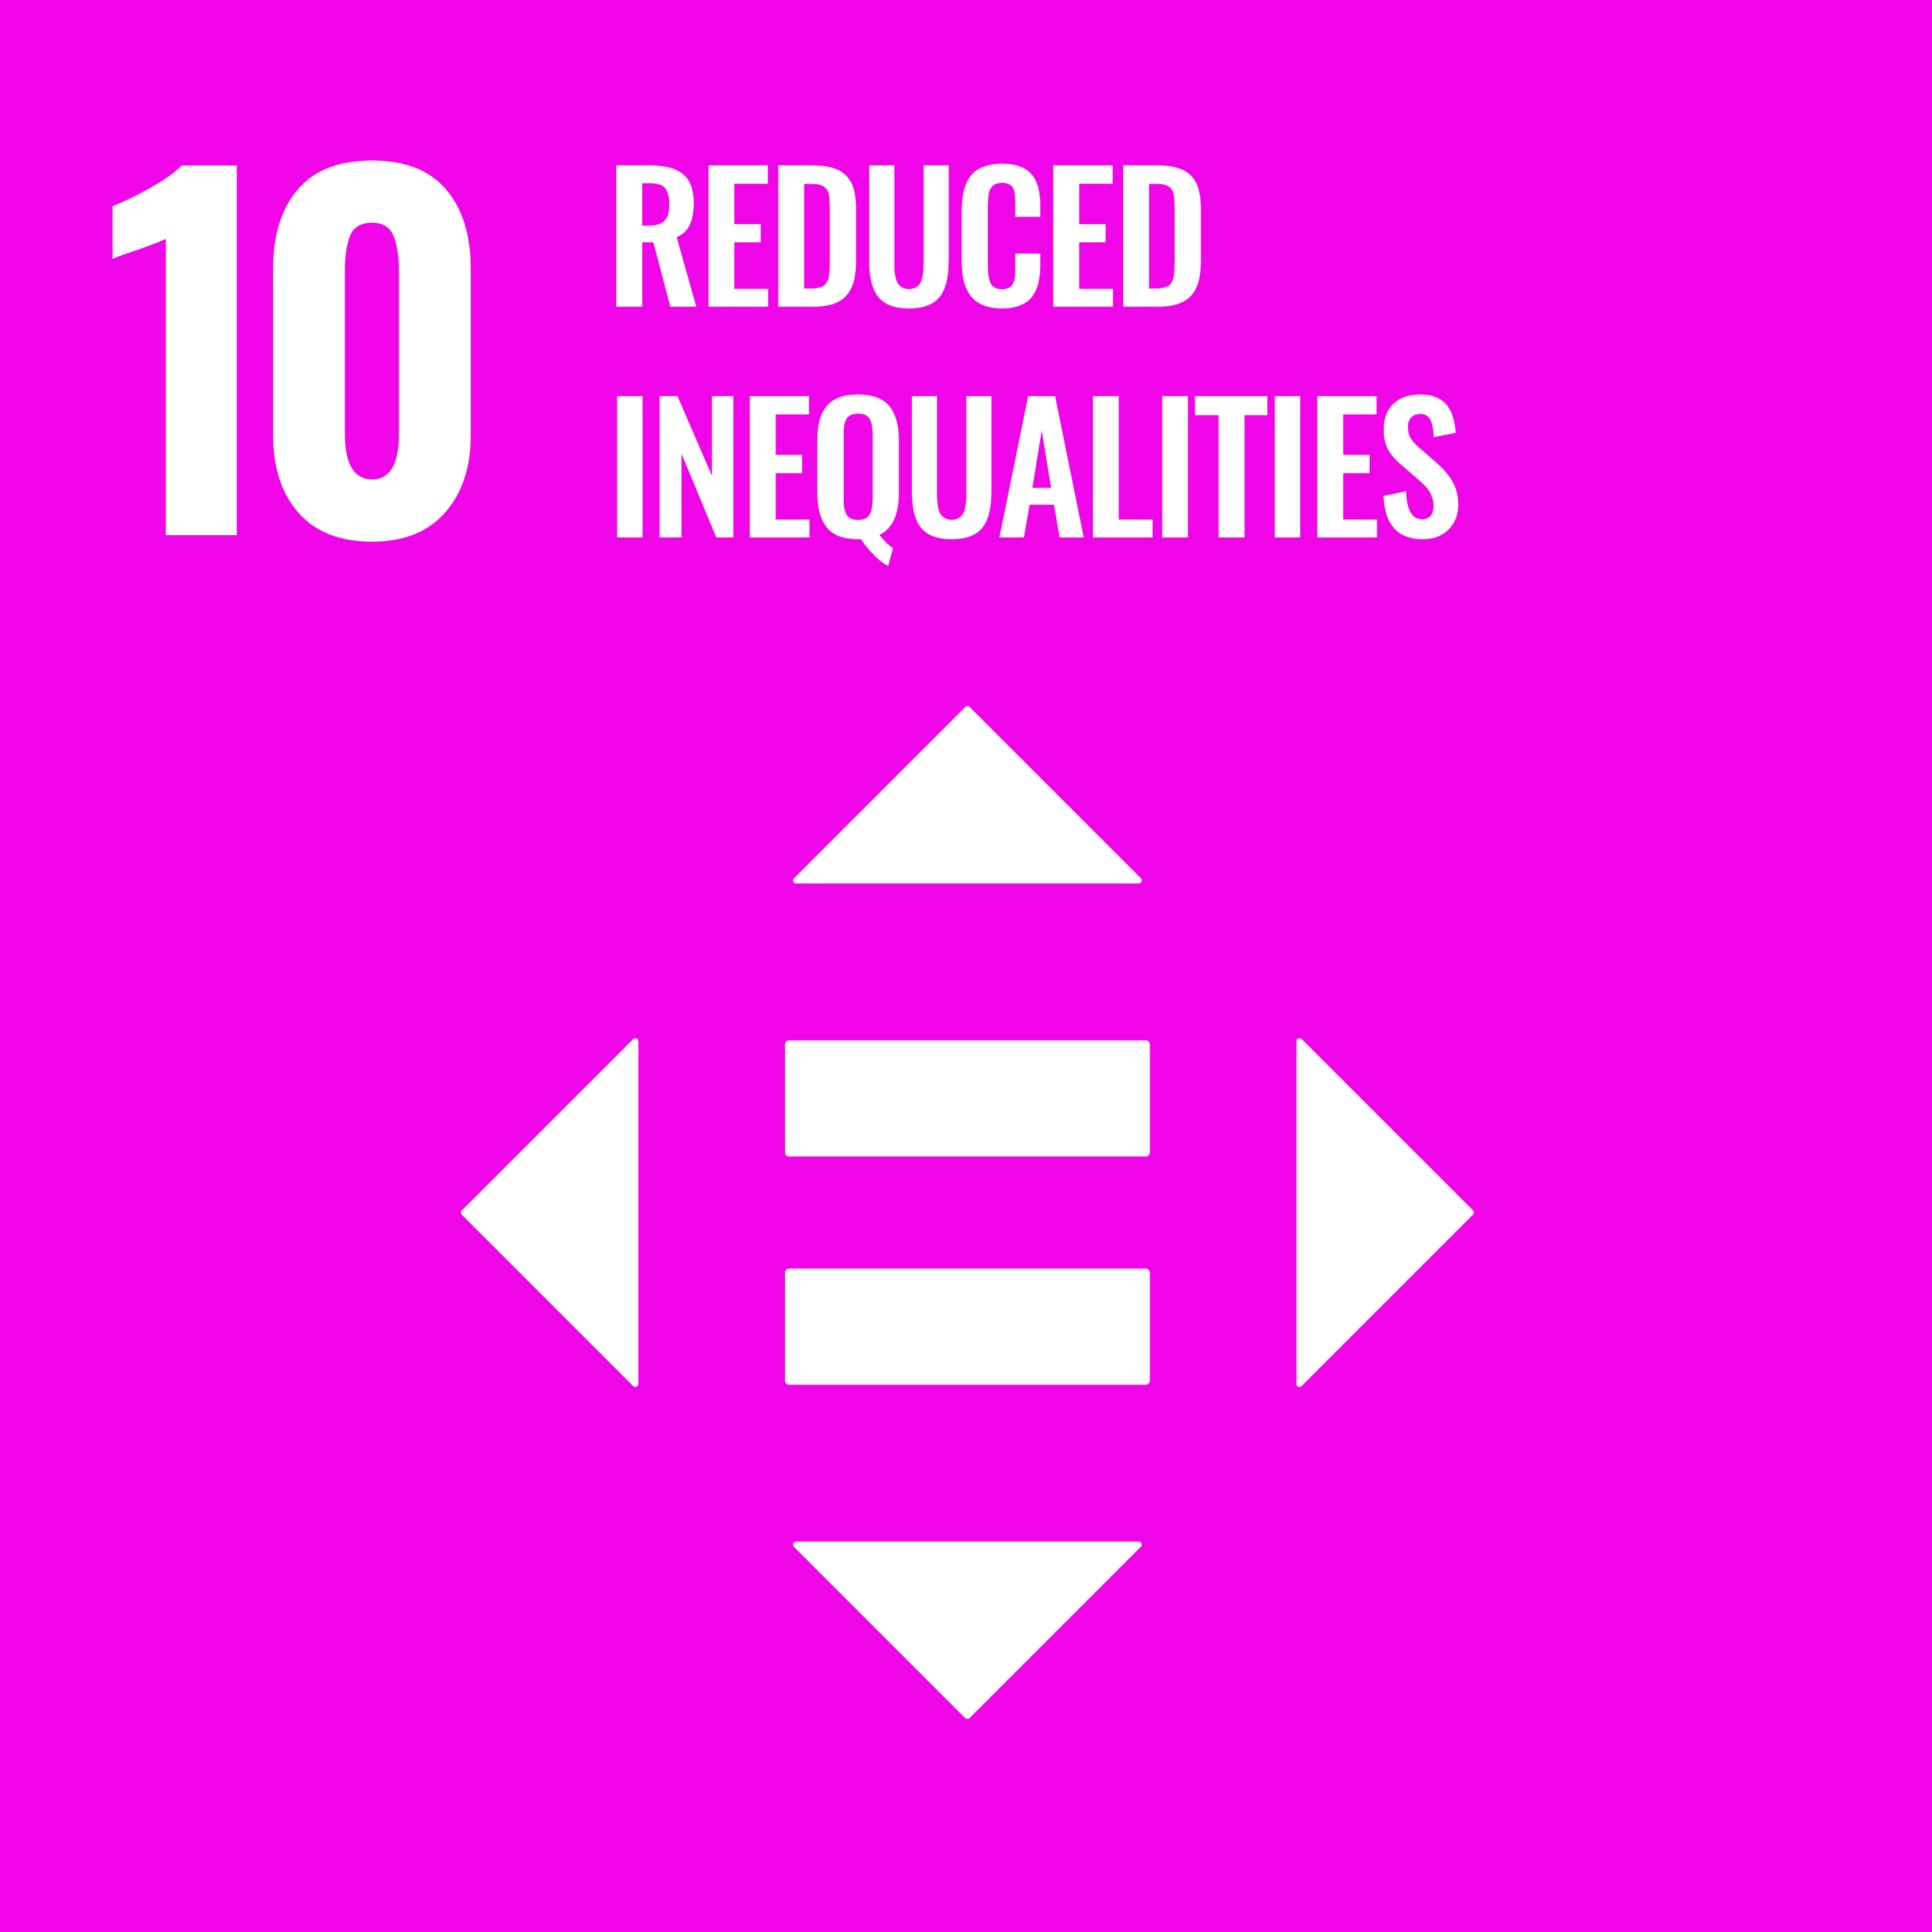 10 Reduced Inequalities (United Nations)